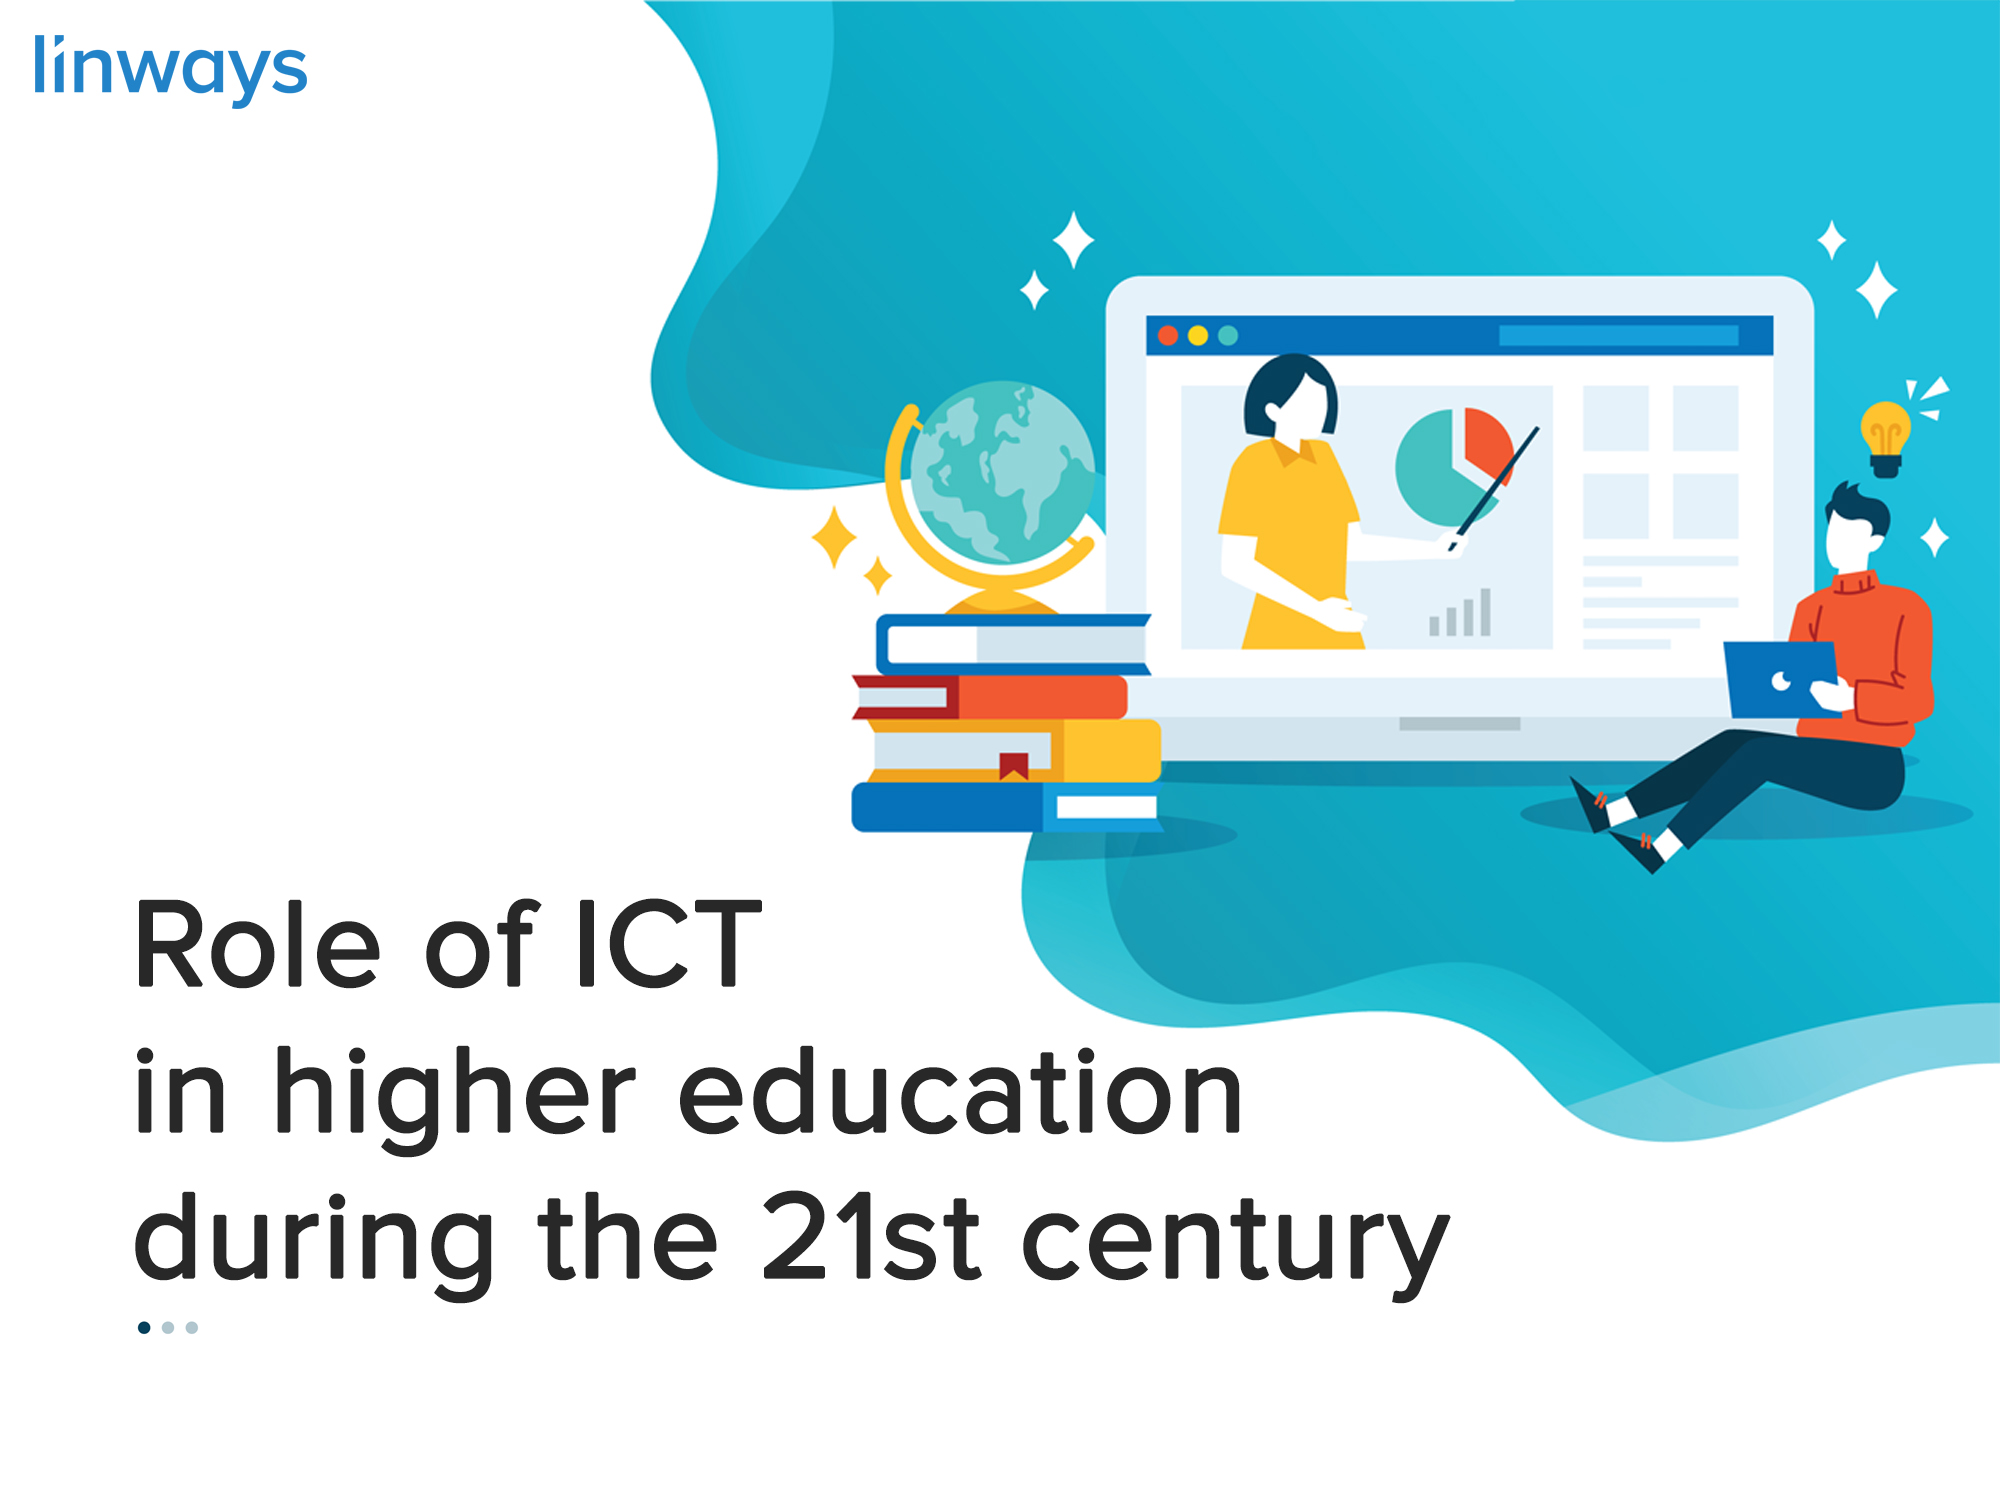 role of technology in 21st century education essay